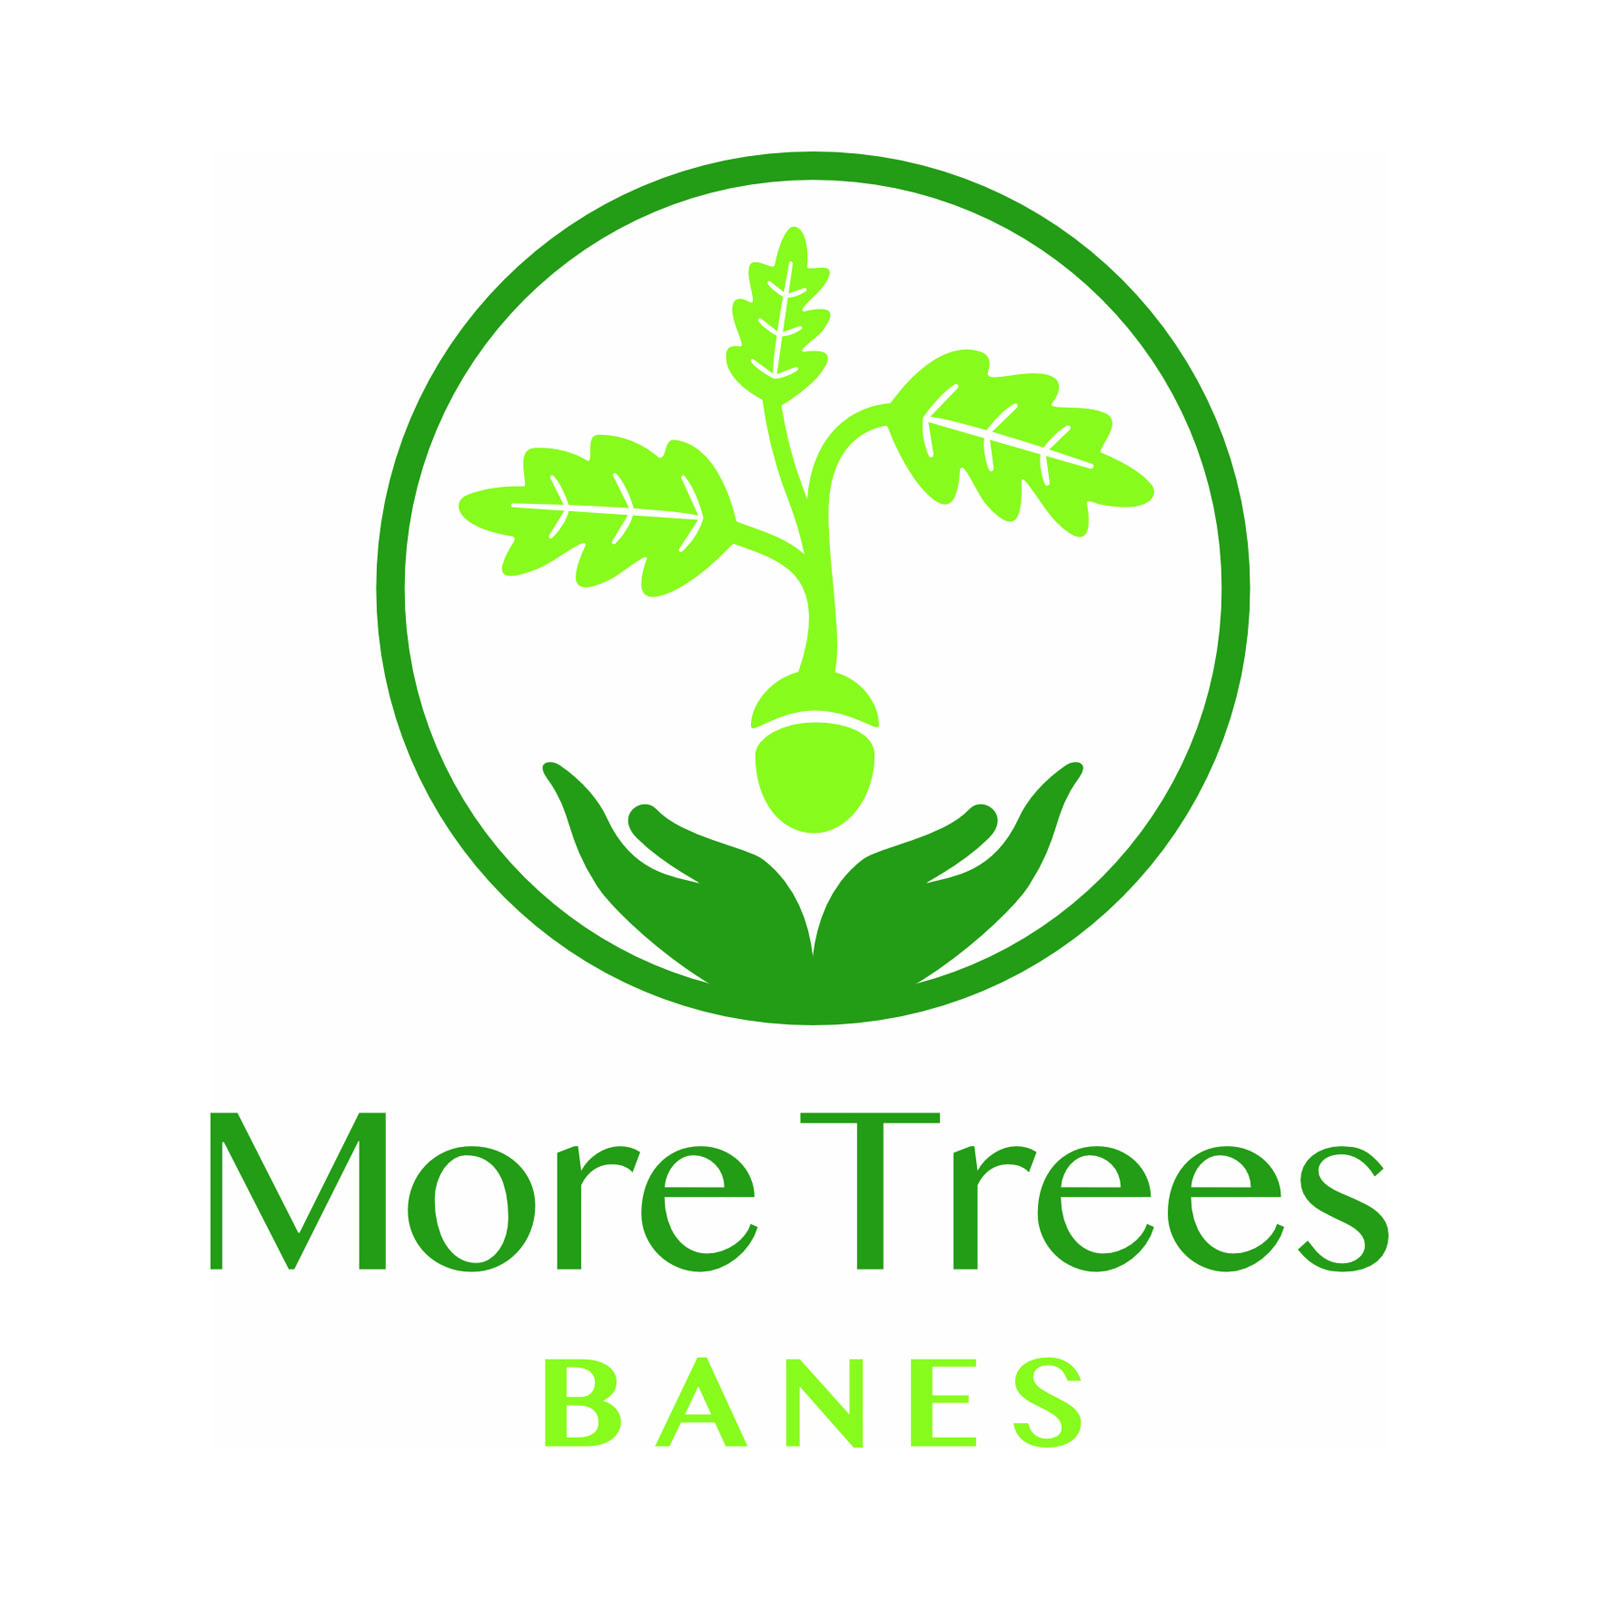 More Trees Banes